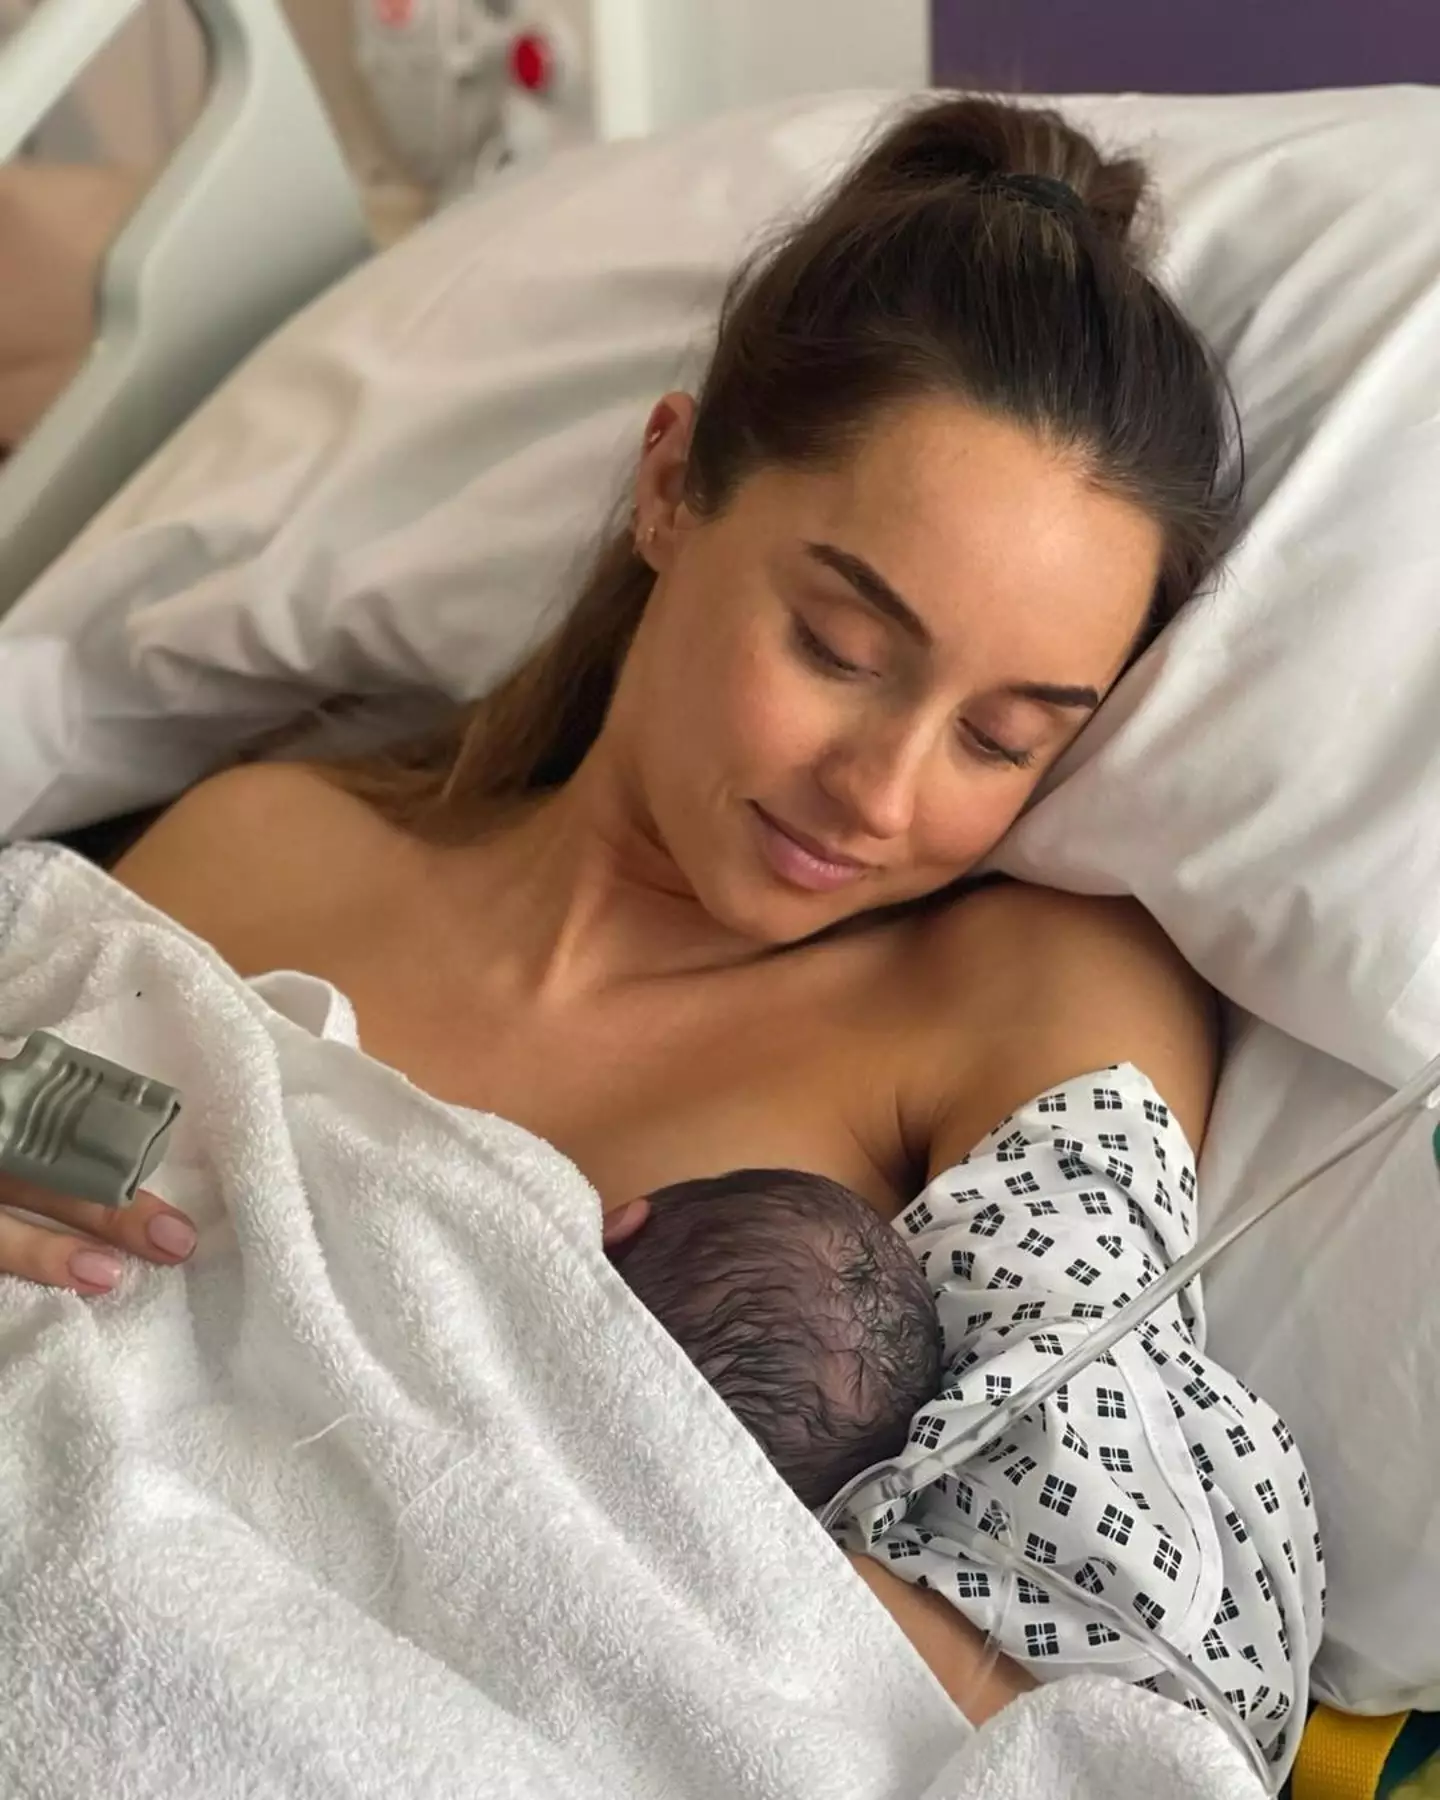 Mum Emily had the final say on her daughter's name. (Instagram/@peterandre)